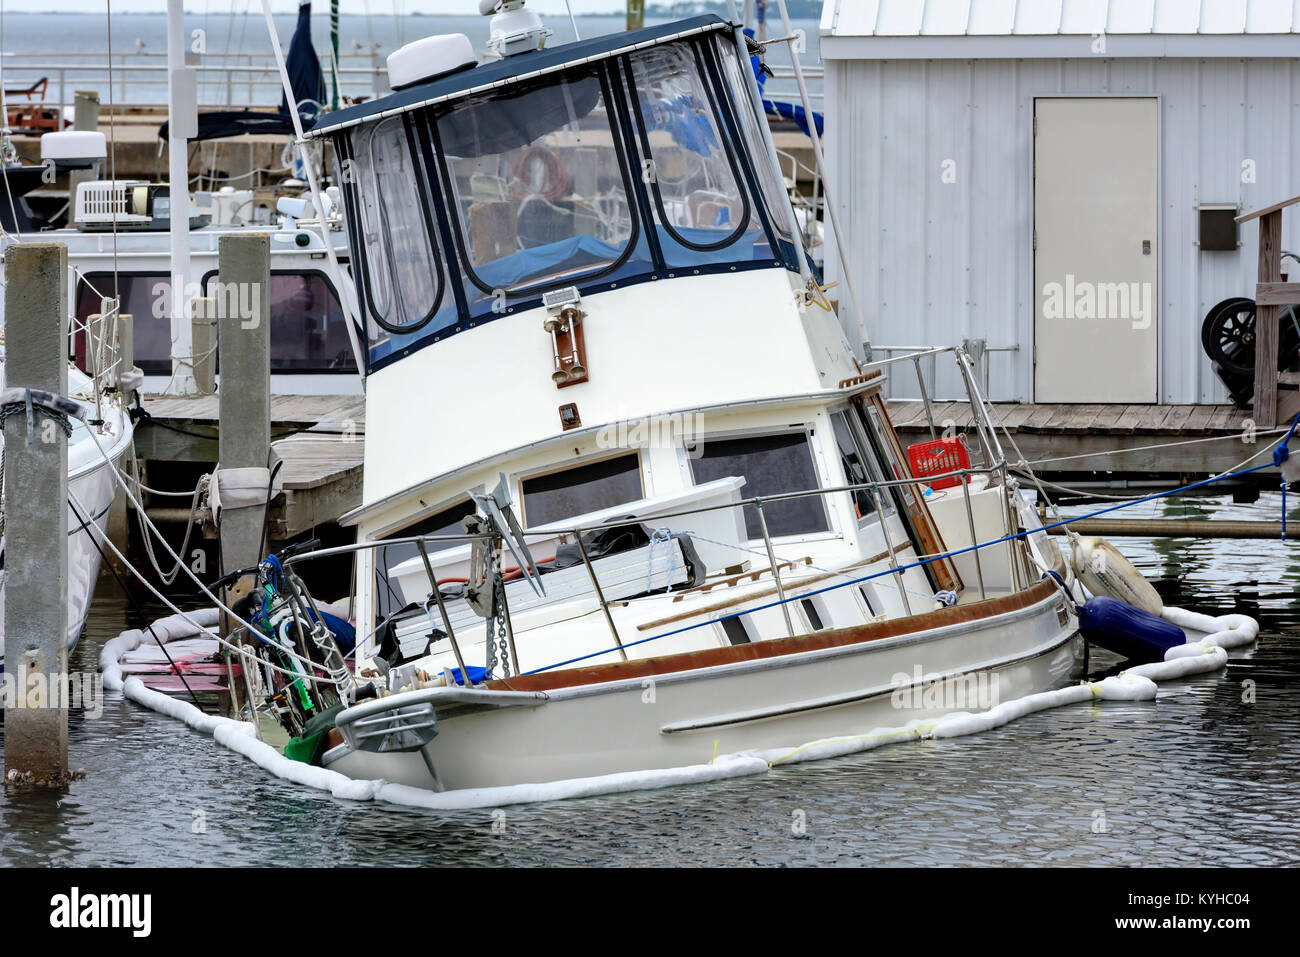 sinking pleasure boat at panama city marina. Looks as if the mooring ropes kept this boat from going under. Stock Photo